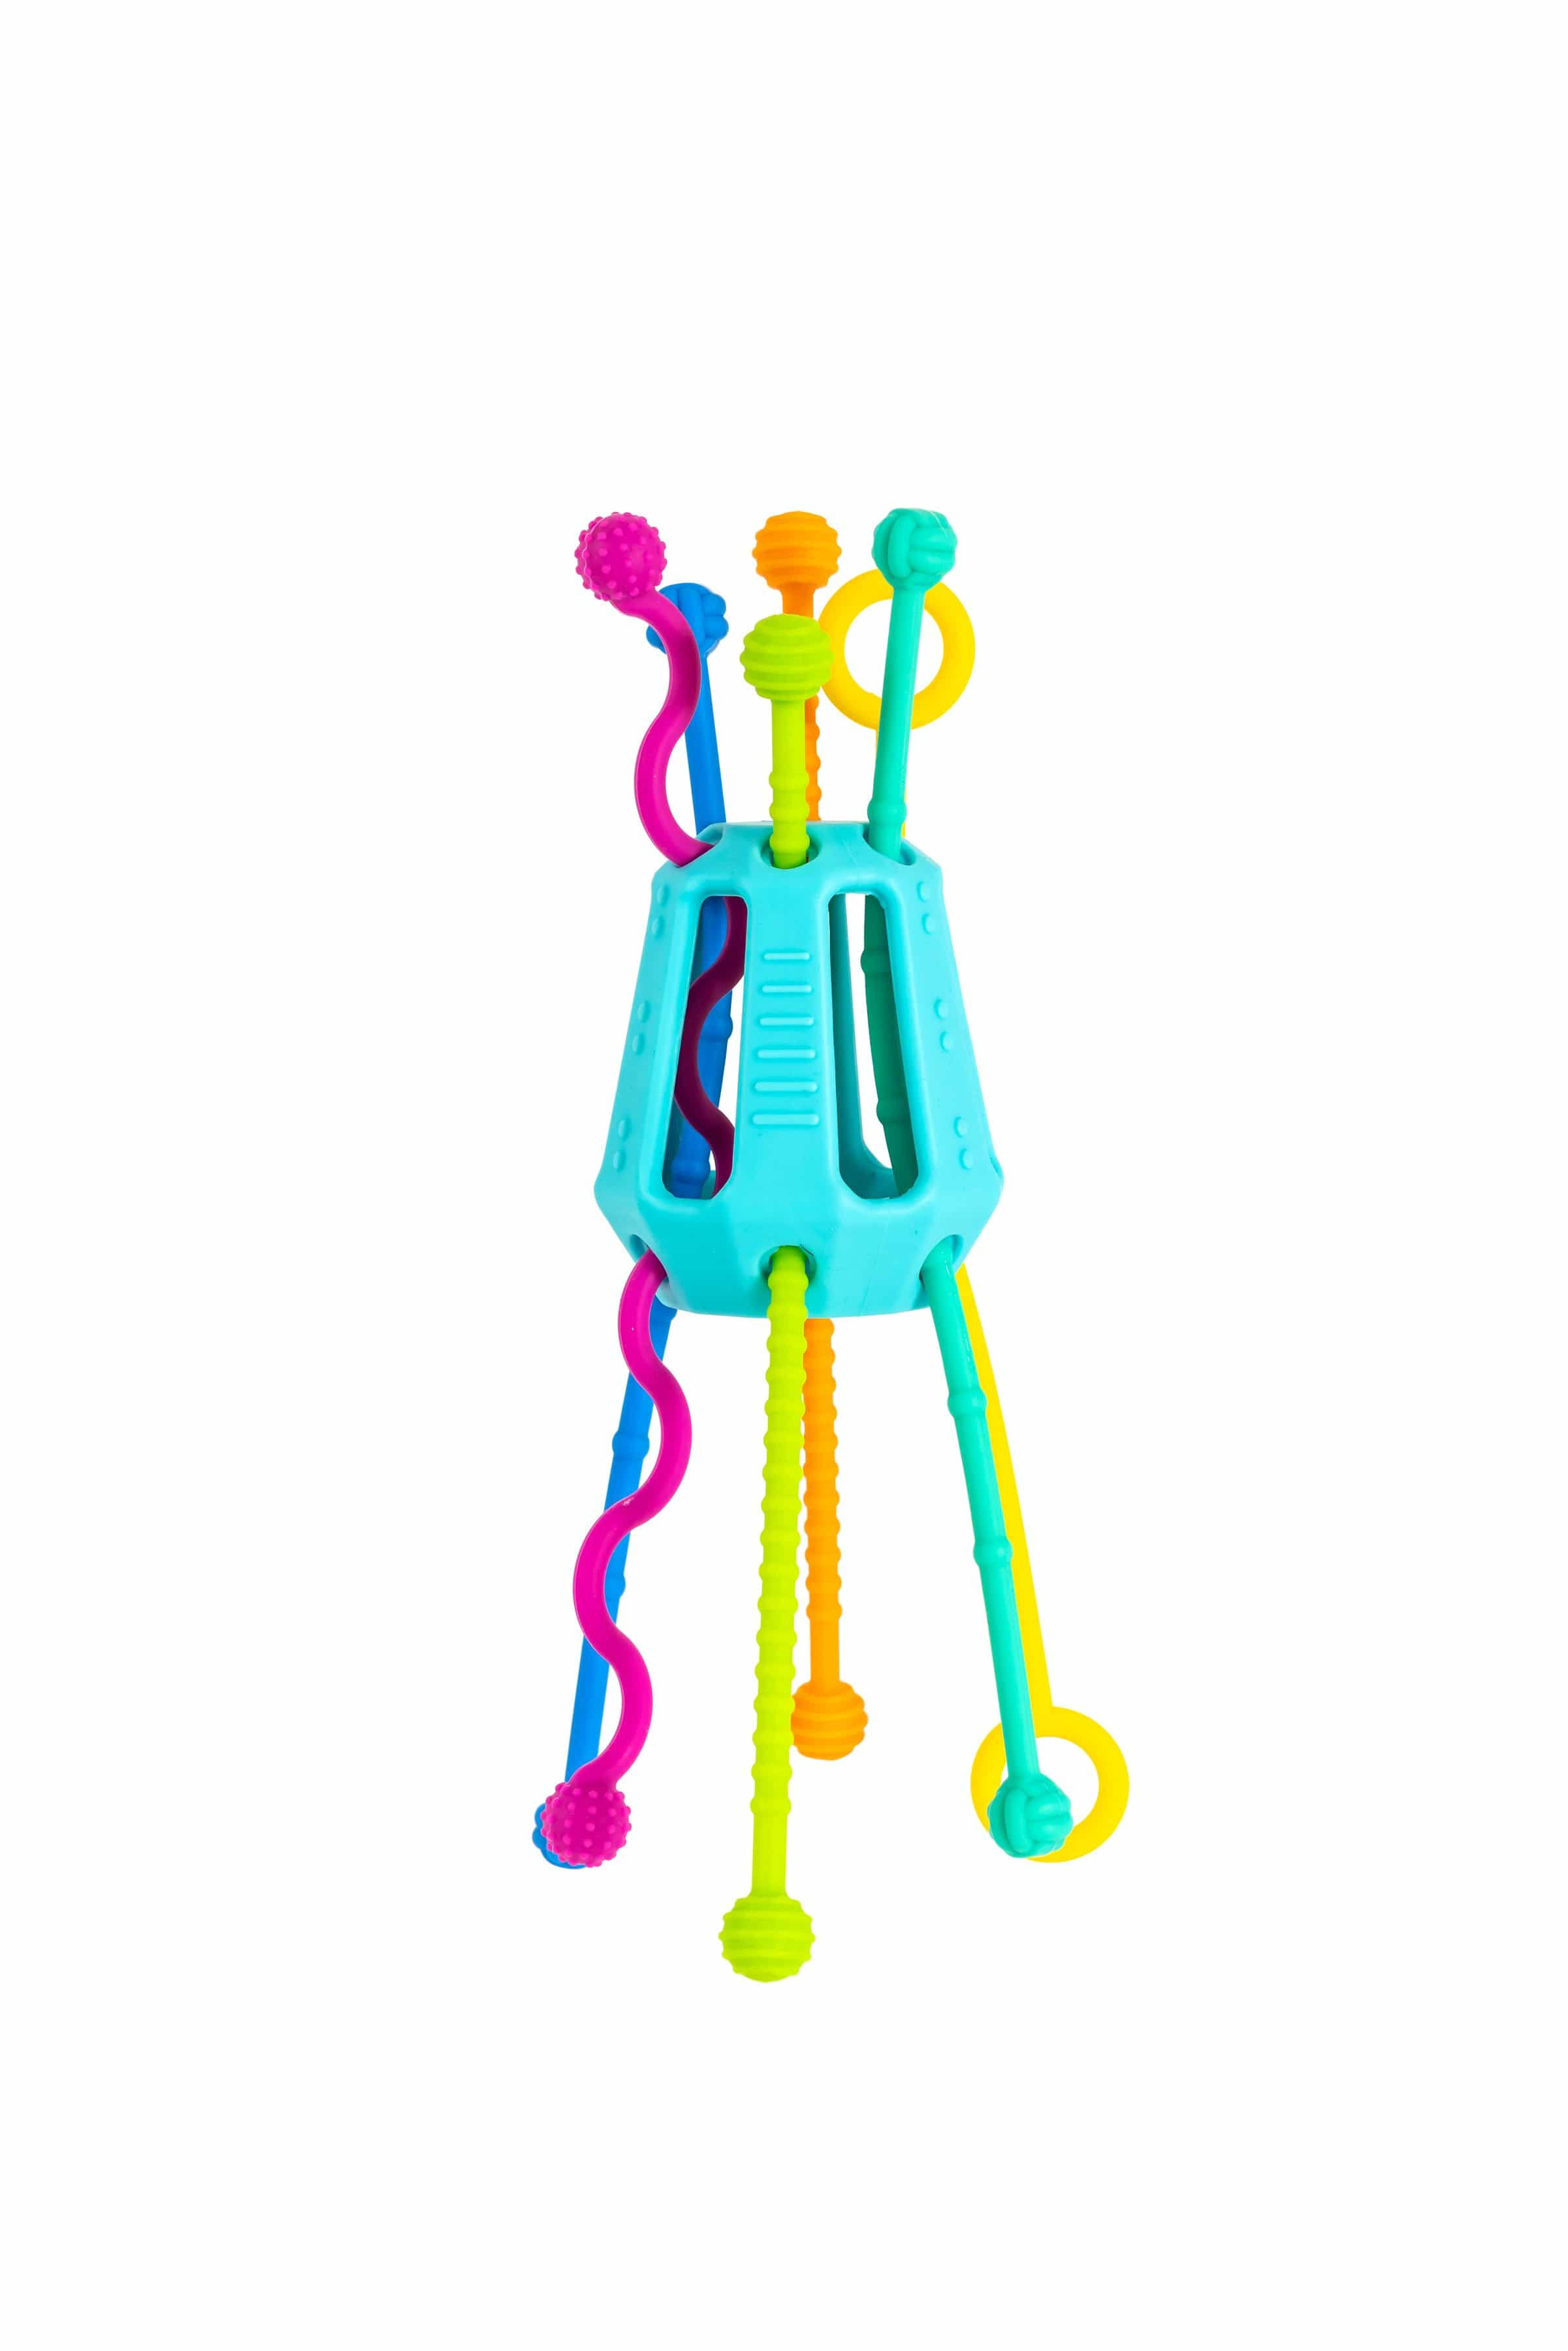 Mobi Zippee - Activity Toy For Sensory Development For Toddlers - Desi